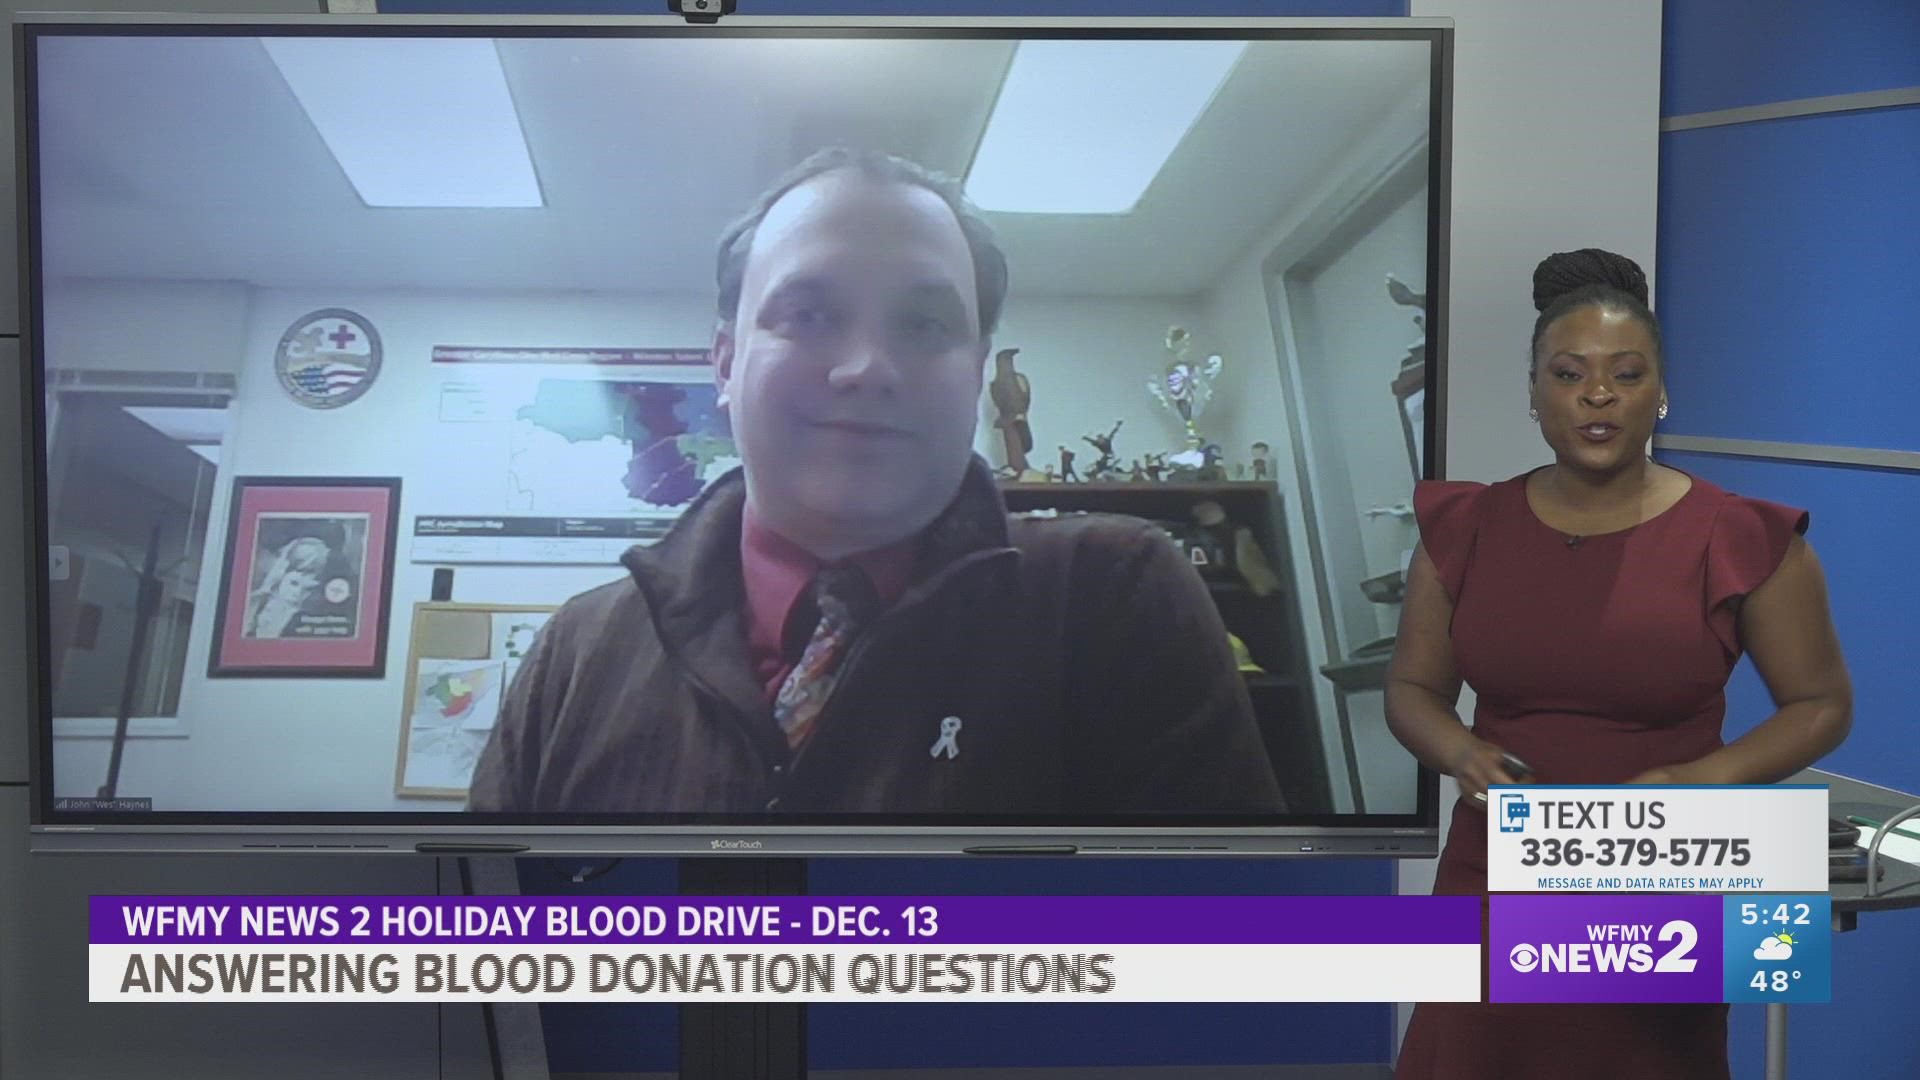 Donate blood Tuesday, December 13 at the WFMY News 2 Holiday Blood Drive.